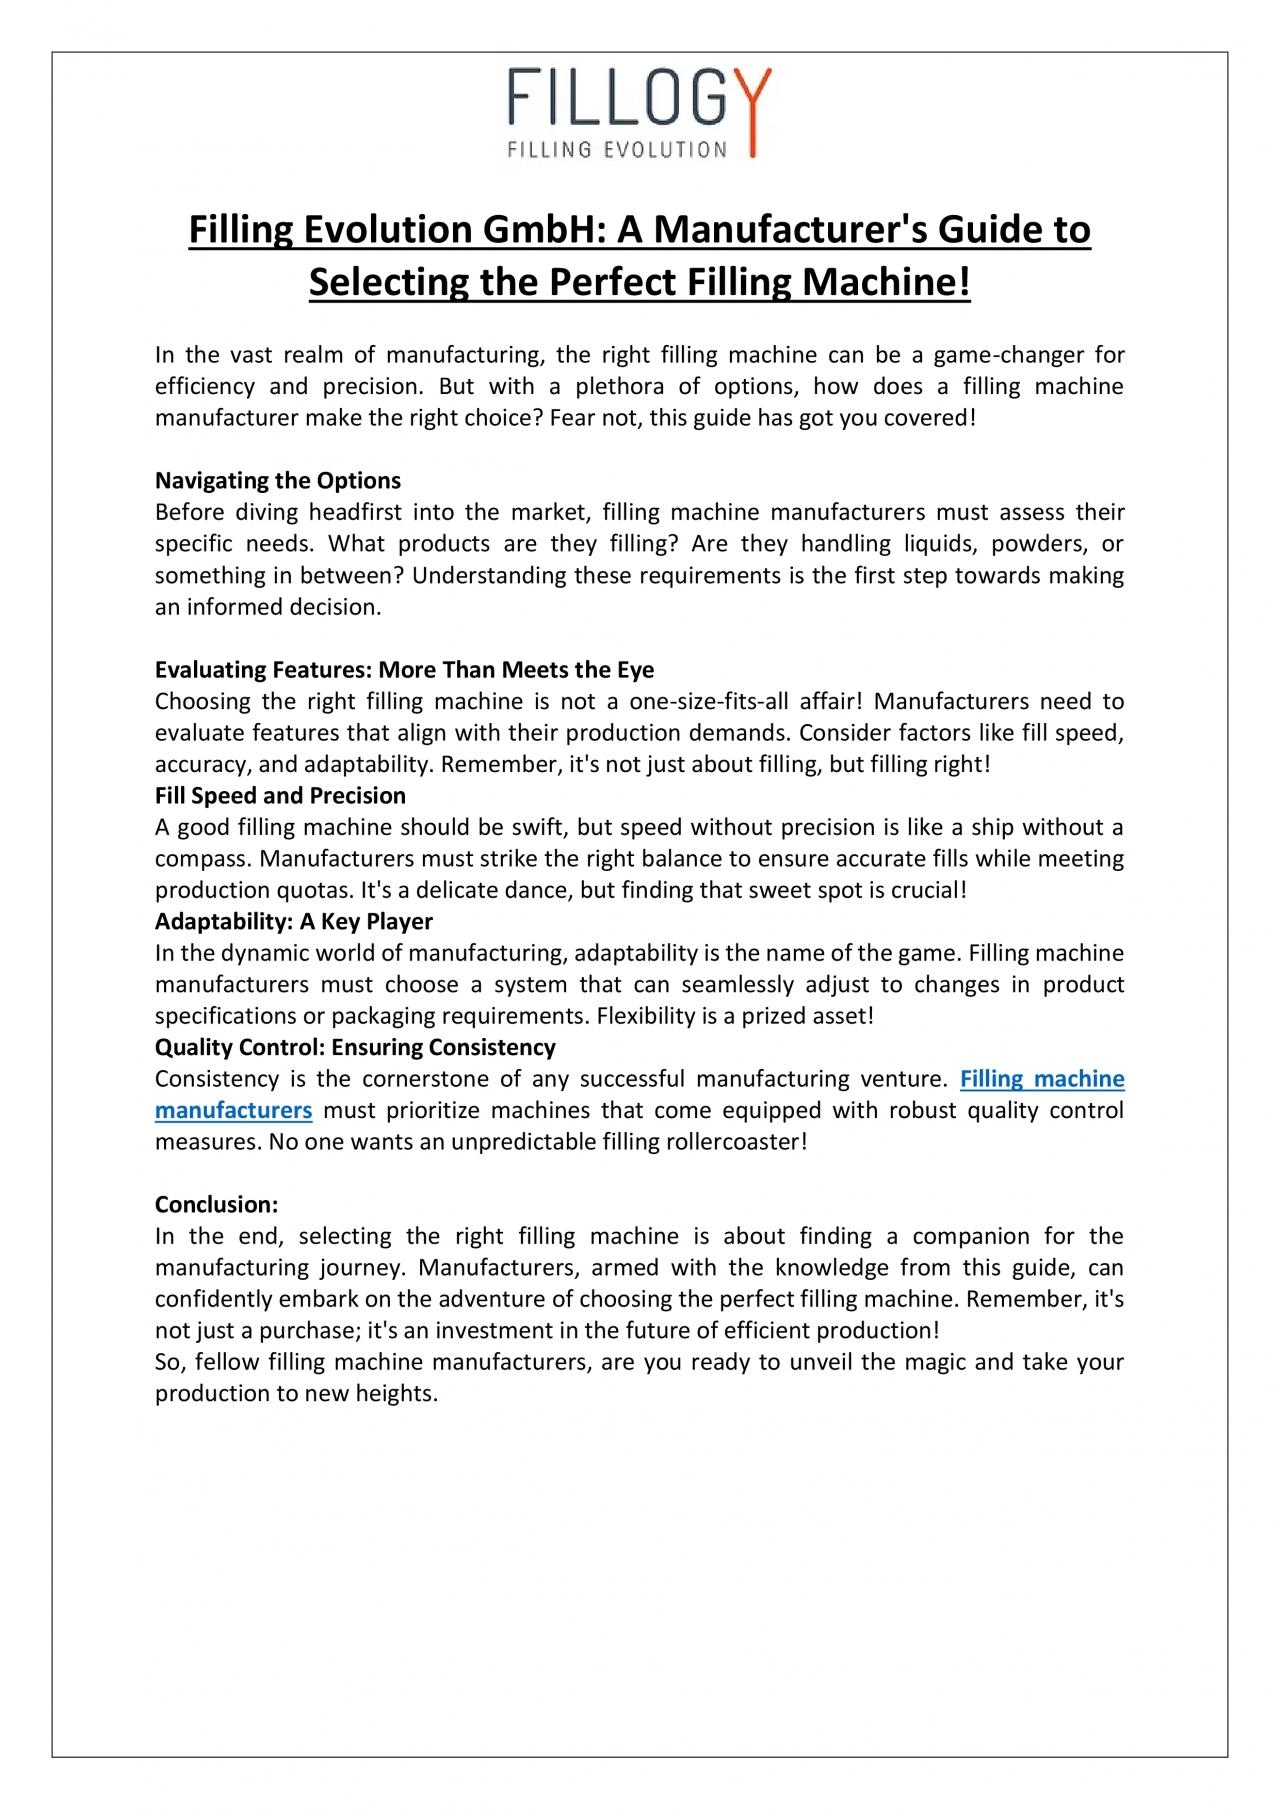 A Manufacturer\'s Guide to Selecting the Perfect Filling Machine By Filling Evolution